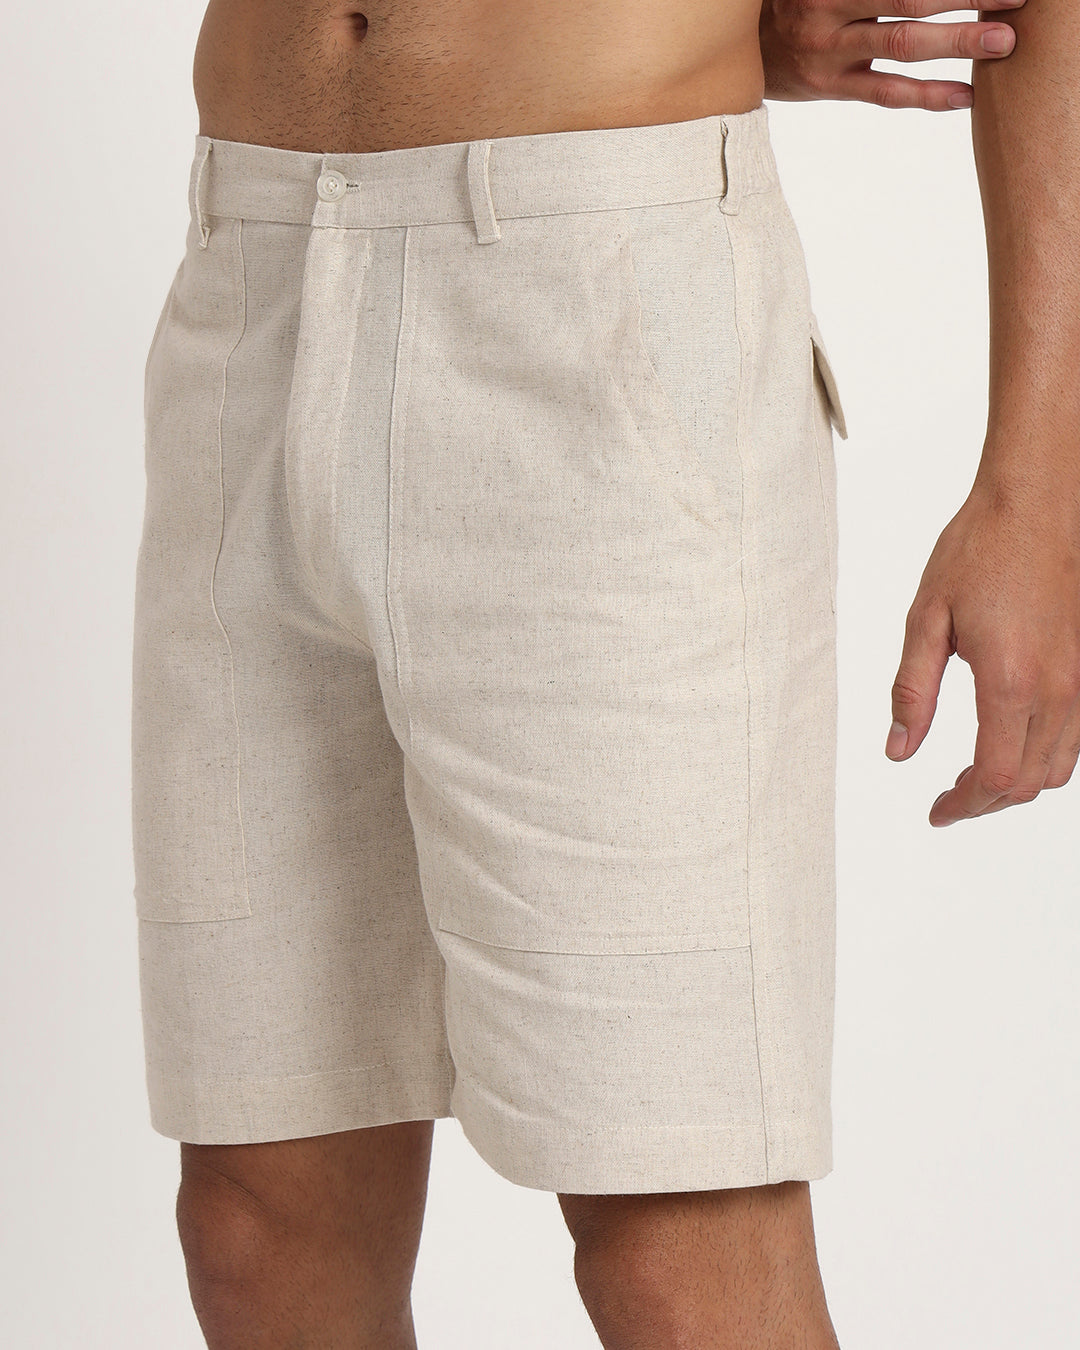 Combo : Patch Pocket Playtime White & Beige Men's Shorts